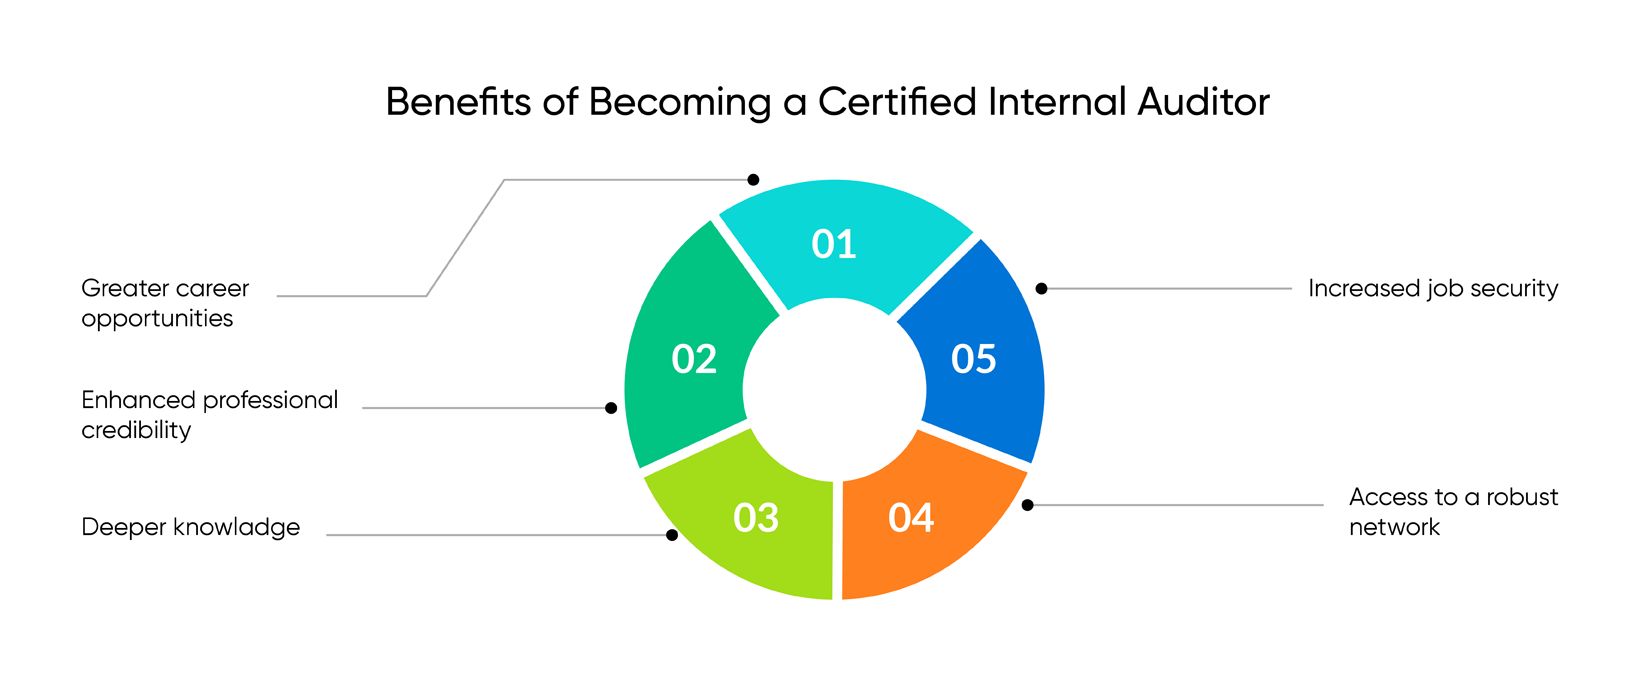 Benefits of Becoming a Certified Internal Auditor